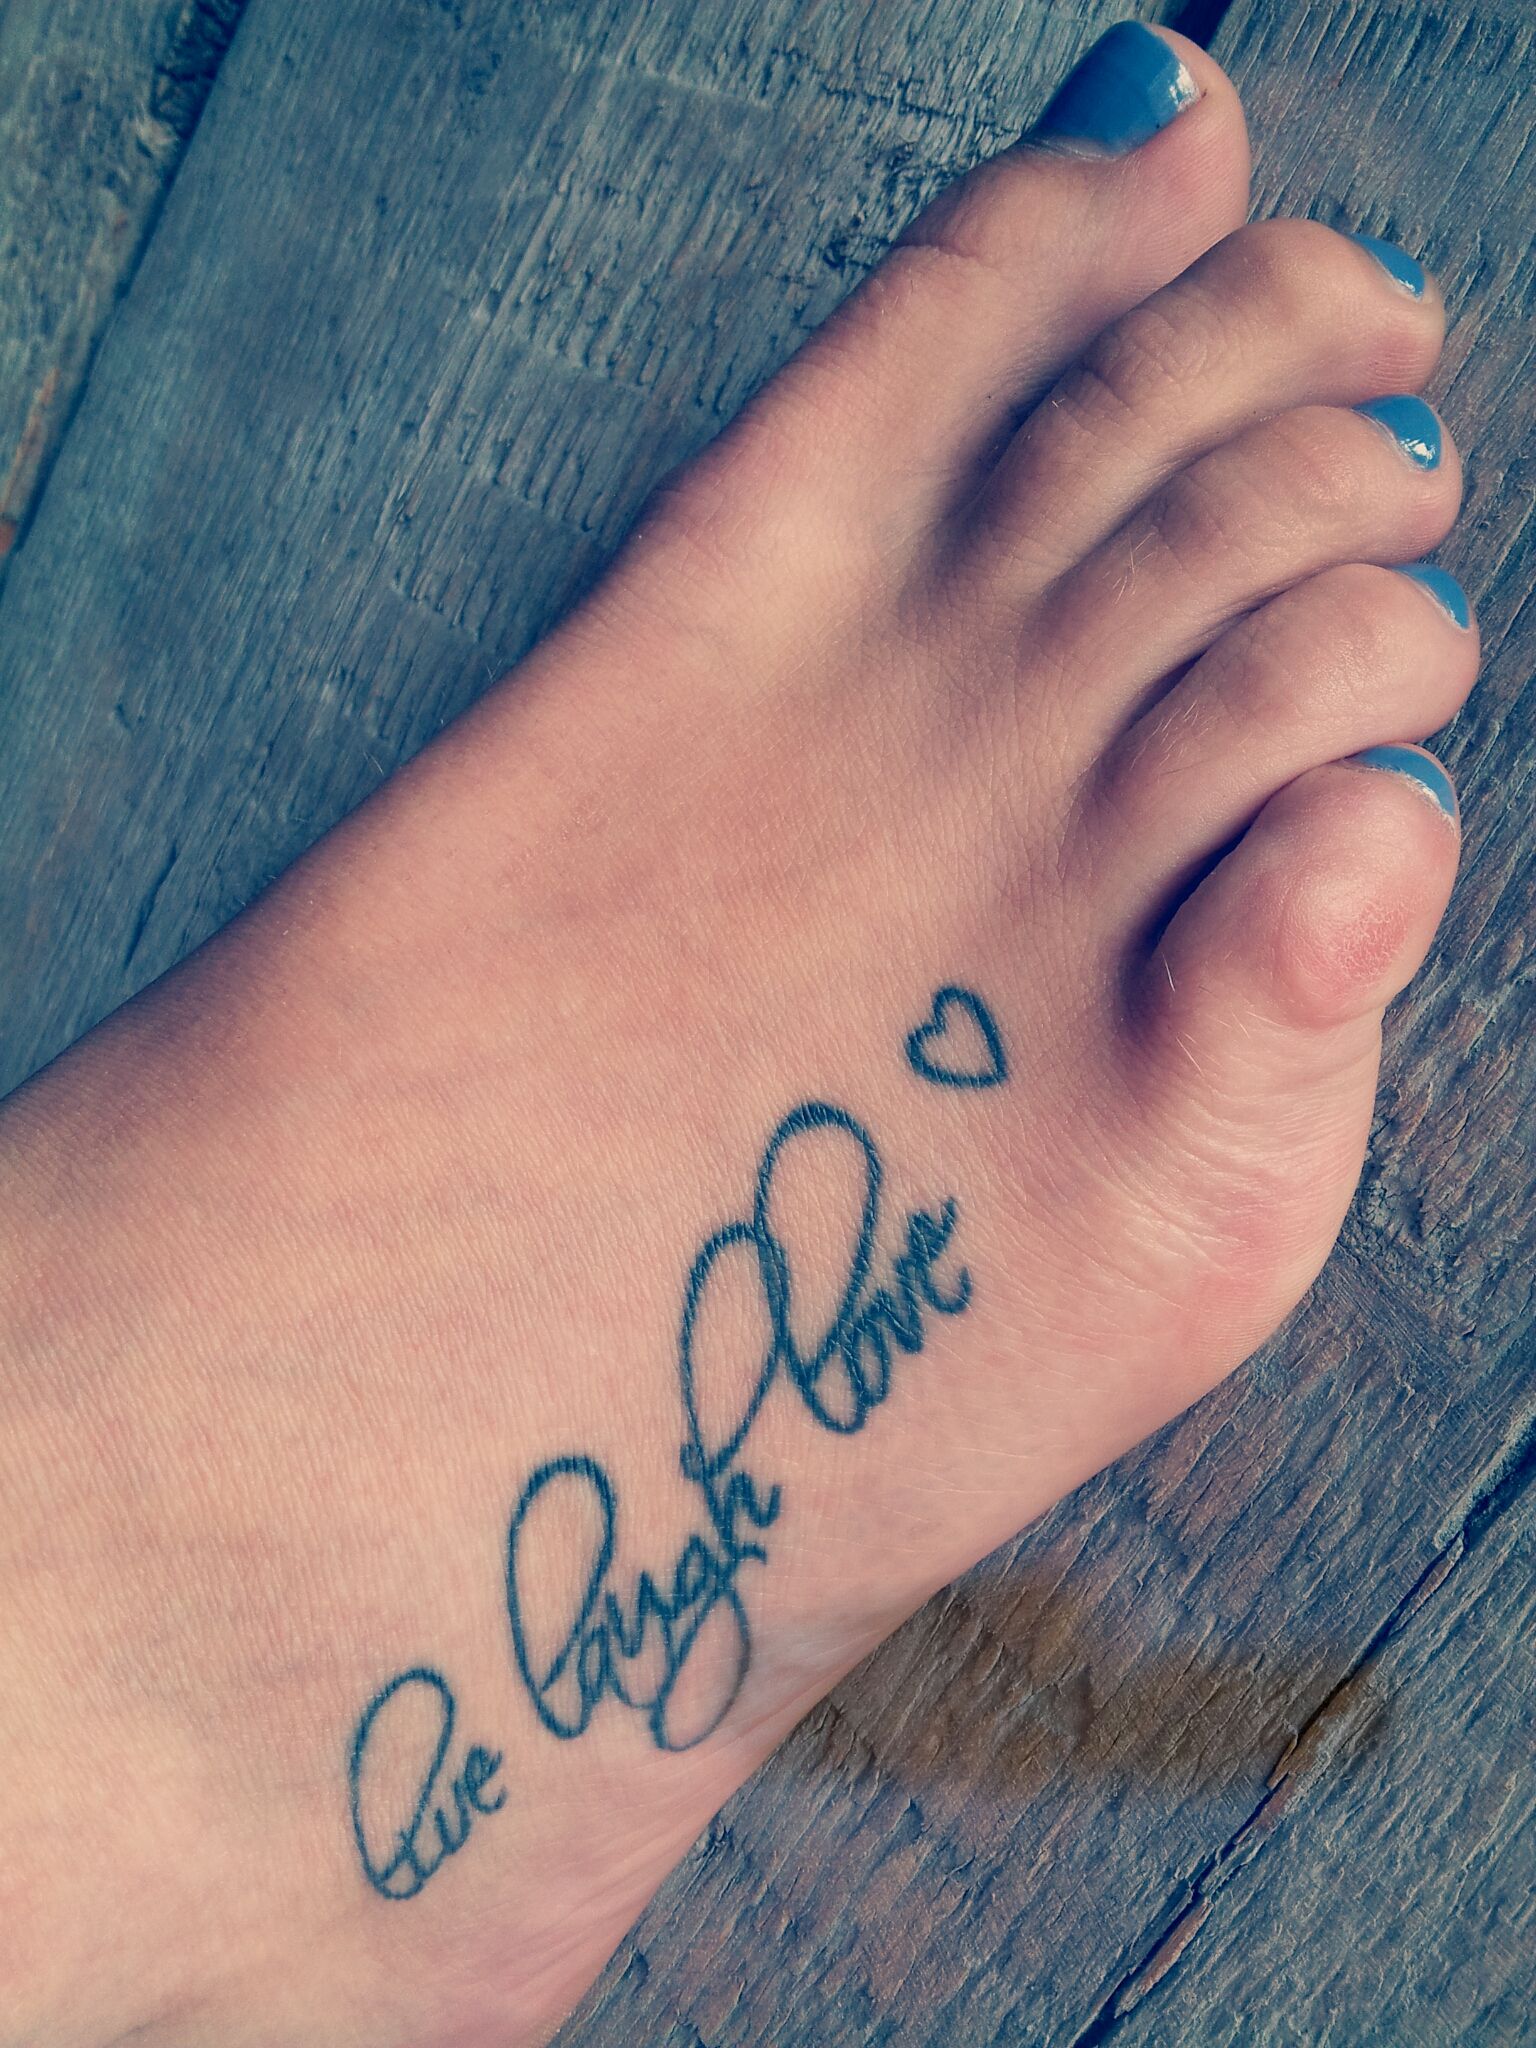 Our Top 10 Best Foot Tattoo Designs